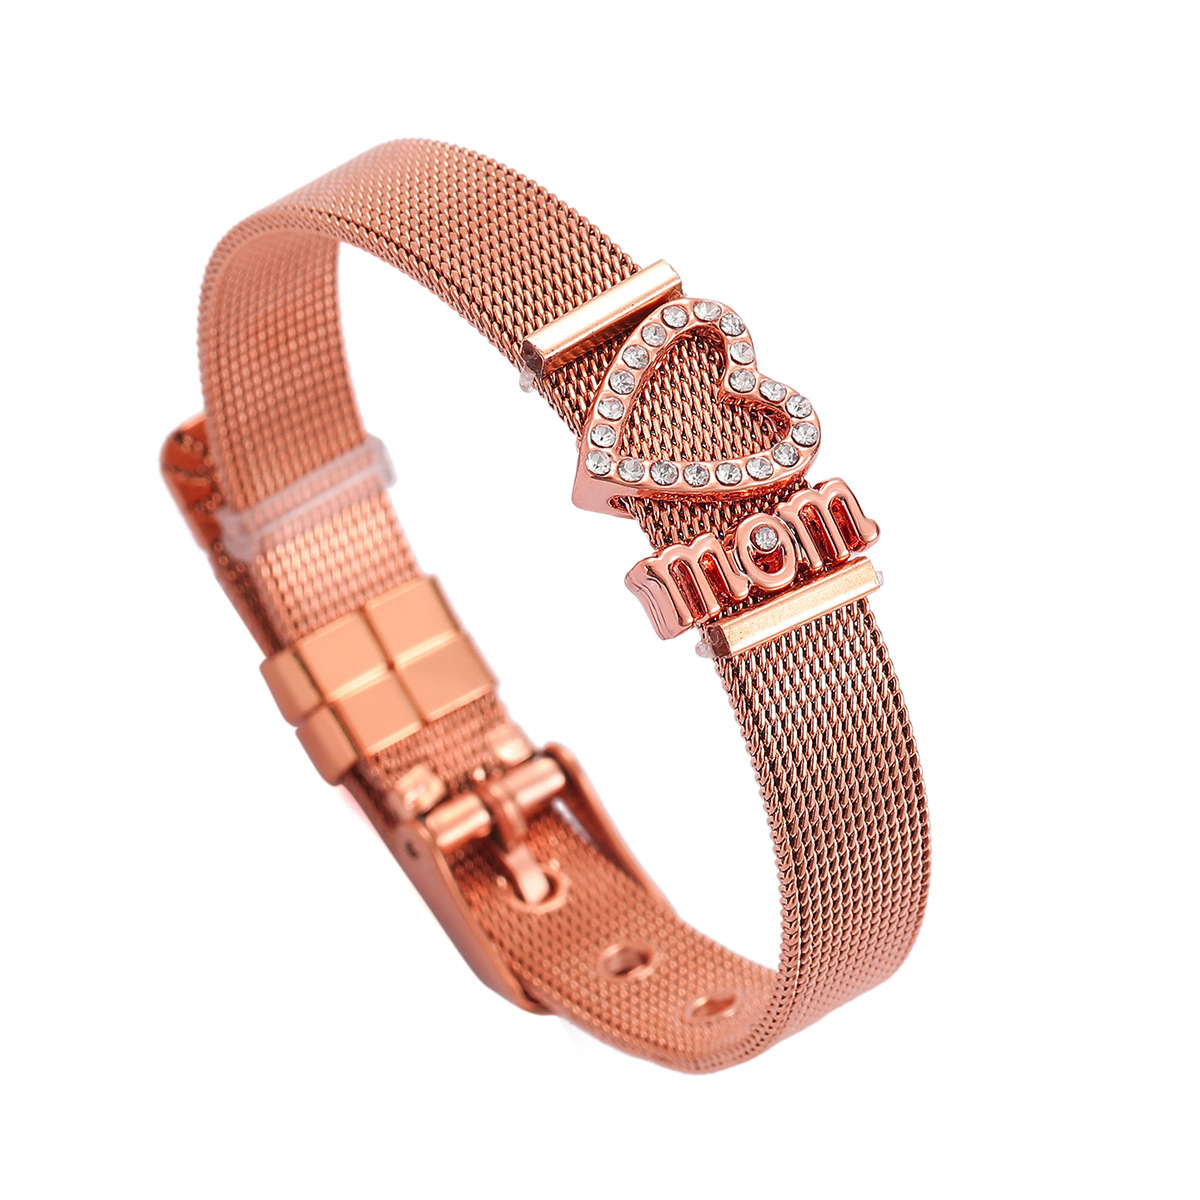 3 real rose gold plated